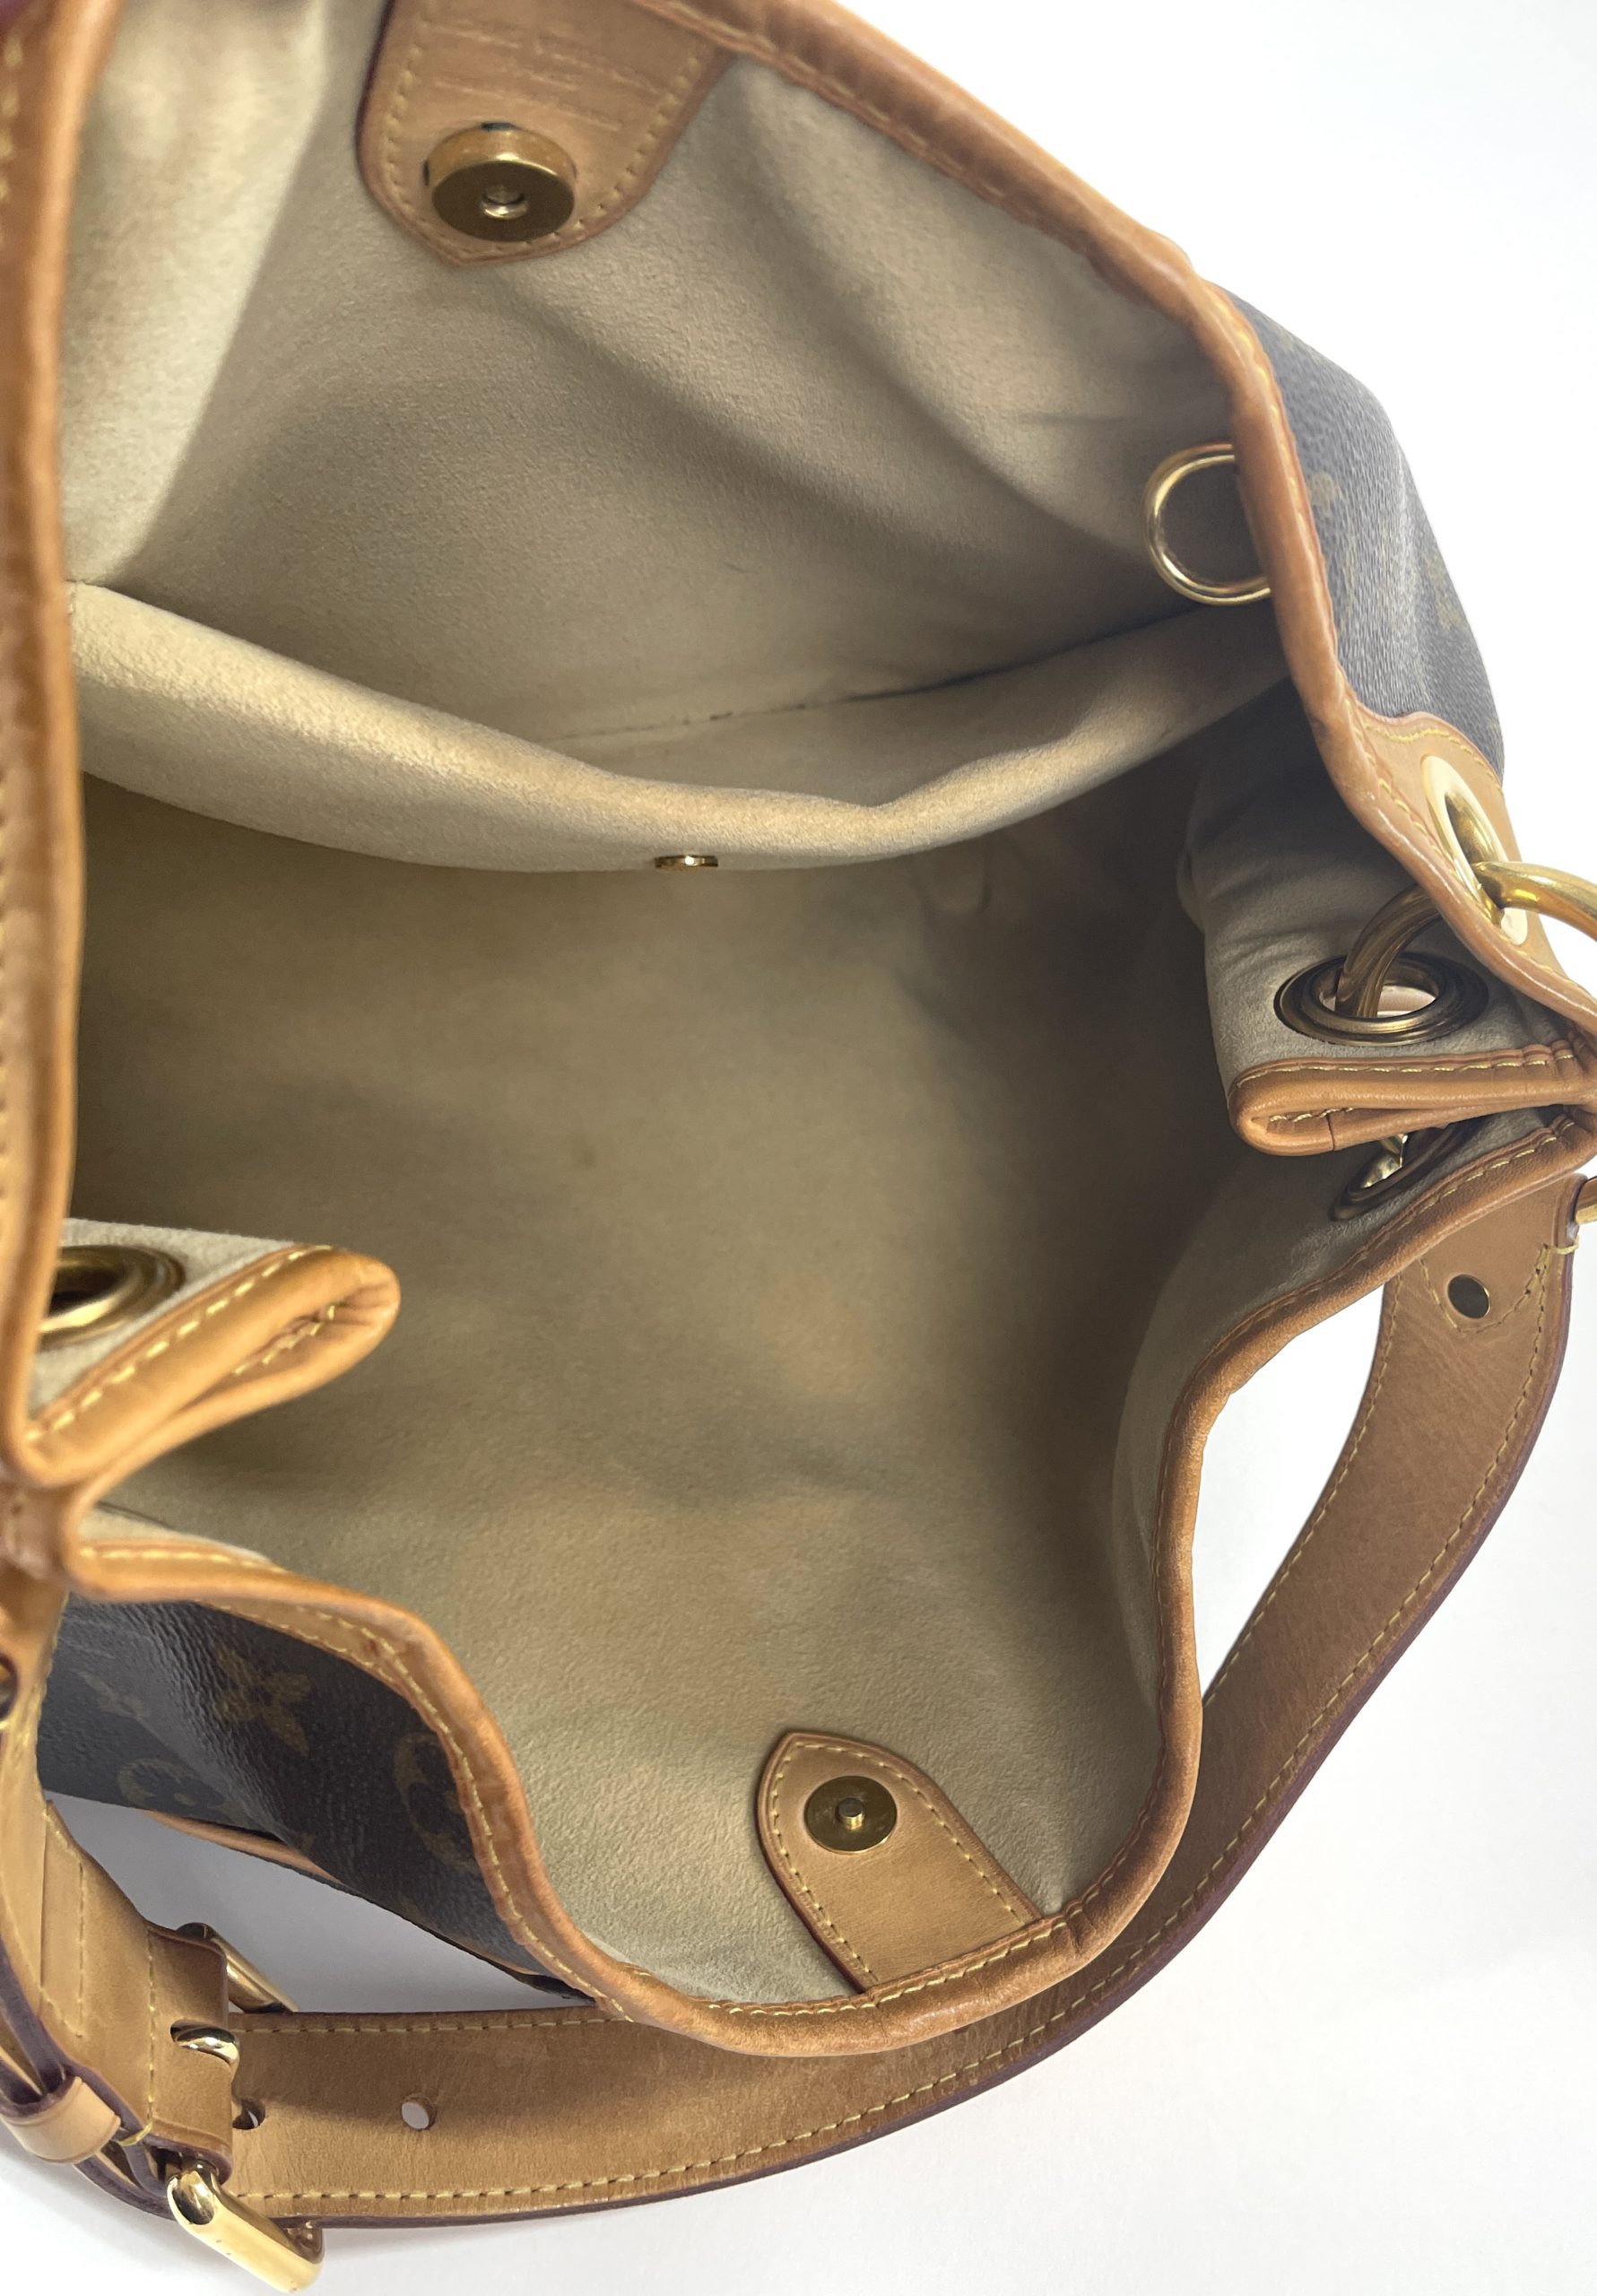 Louis-Vuitton Bucket Bag pm with Zipper Pouch and Dust Bag Leather